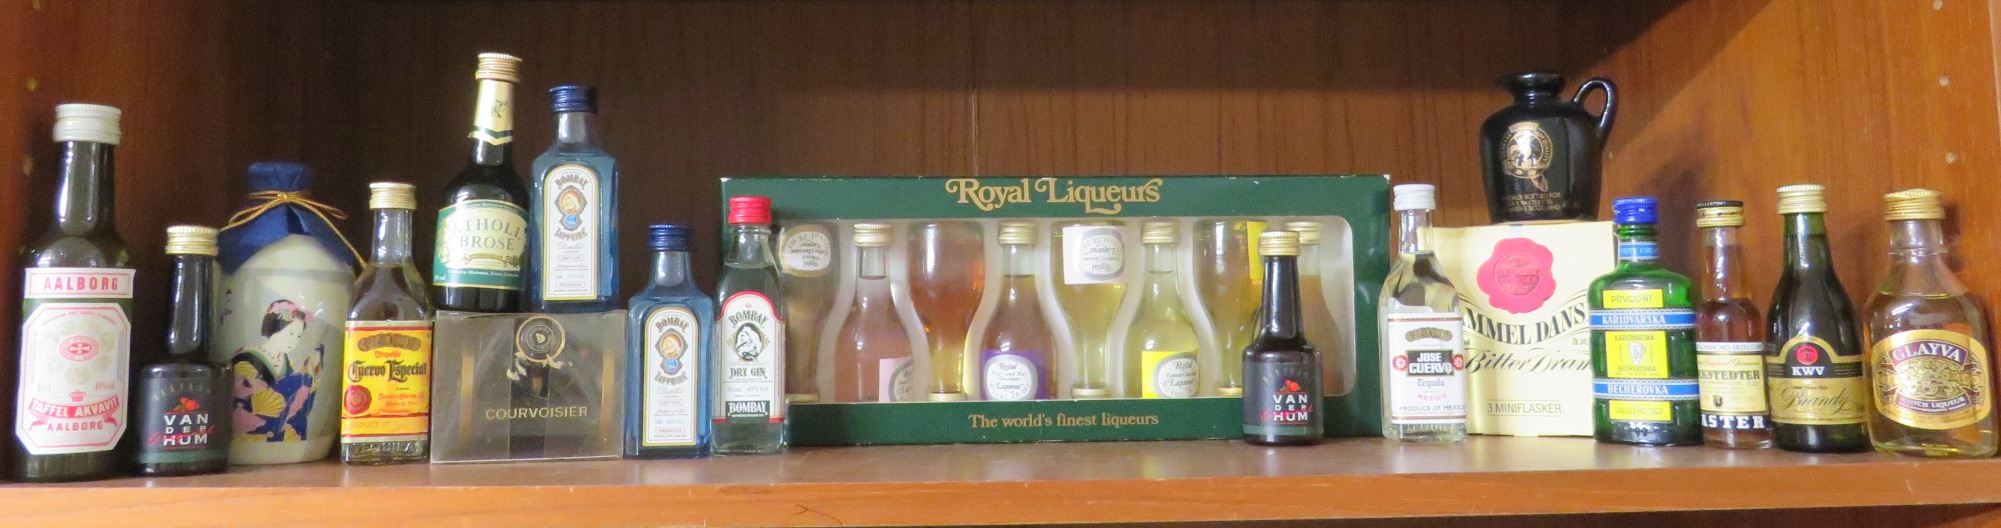 Selection of miniatures including Royal Liqueurs presentation pack, two bottles of Bombay Sapphire